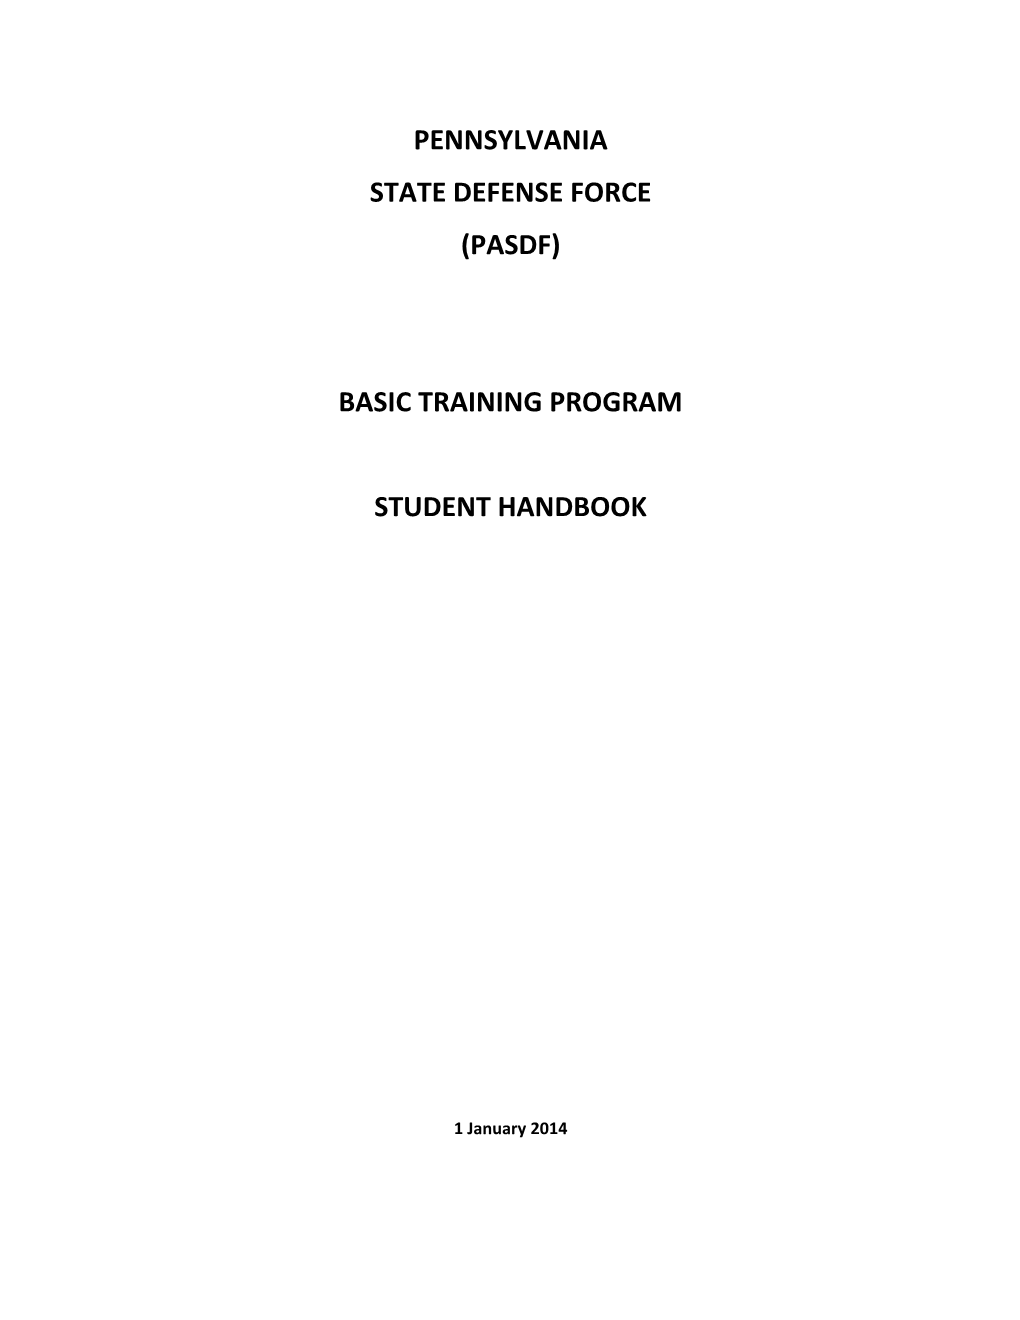 State Defense Force